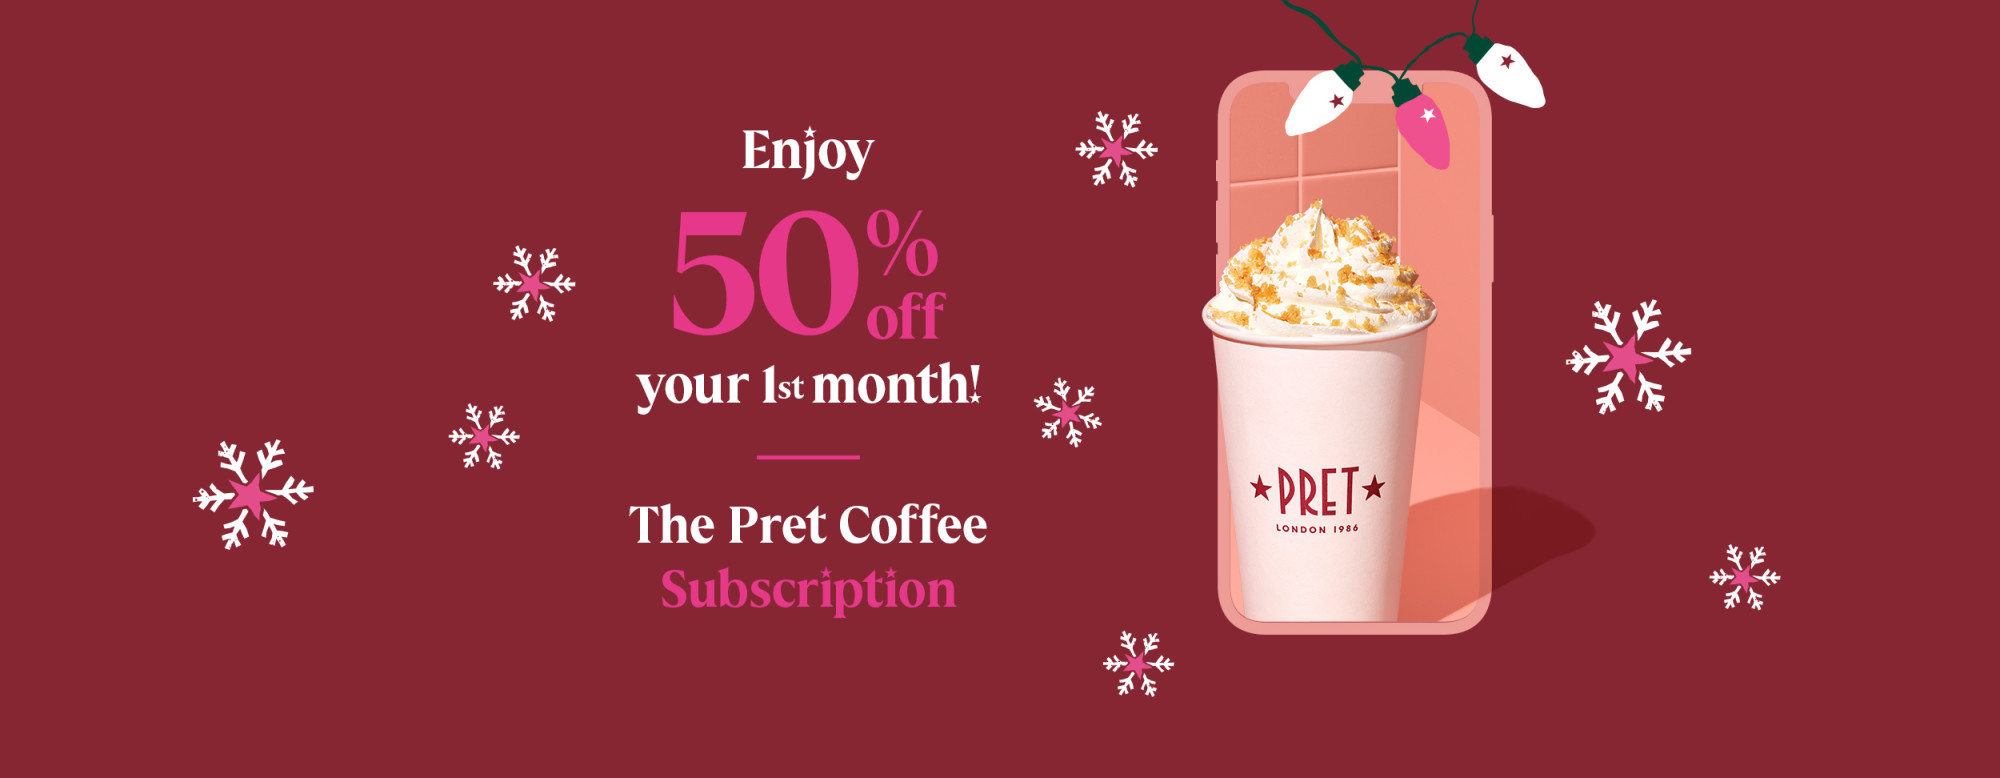 The Pret Coffee Subscription